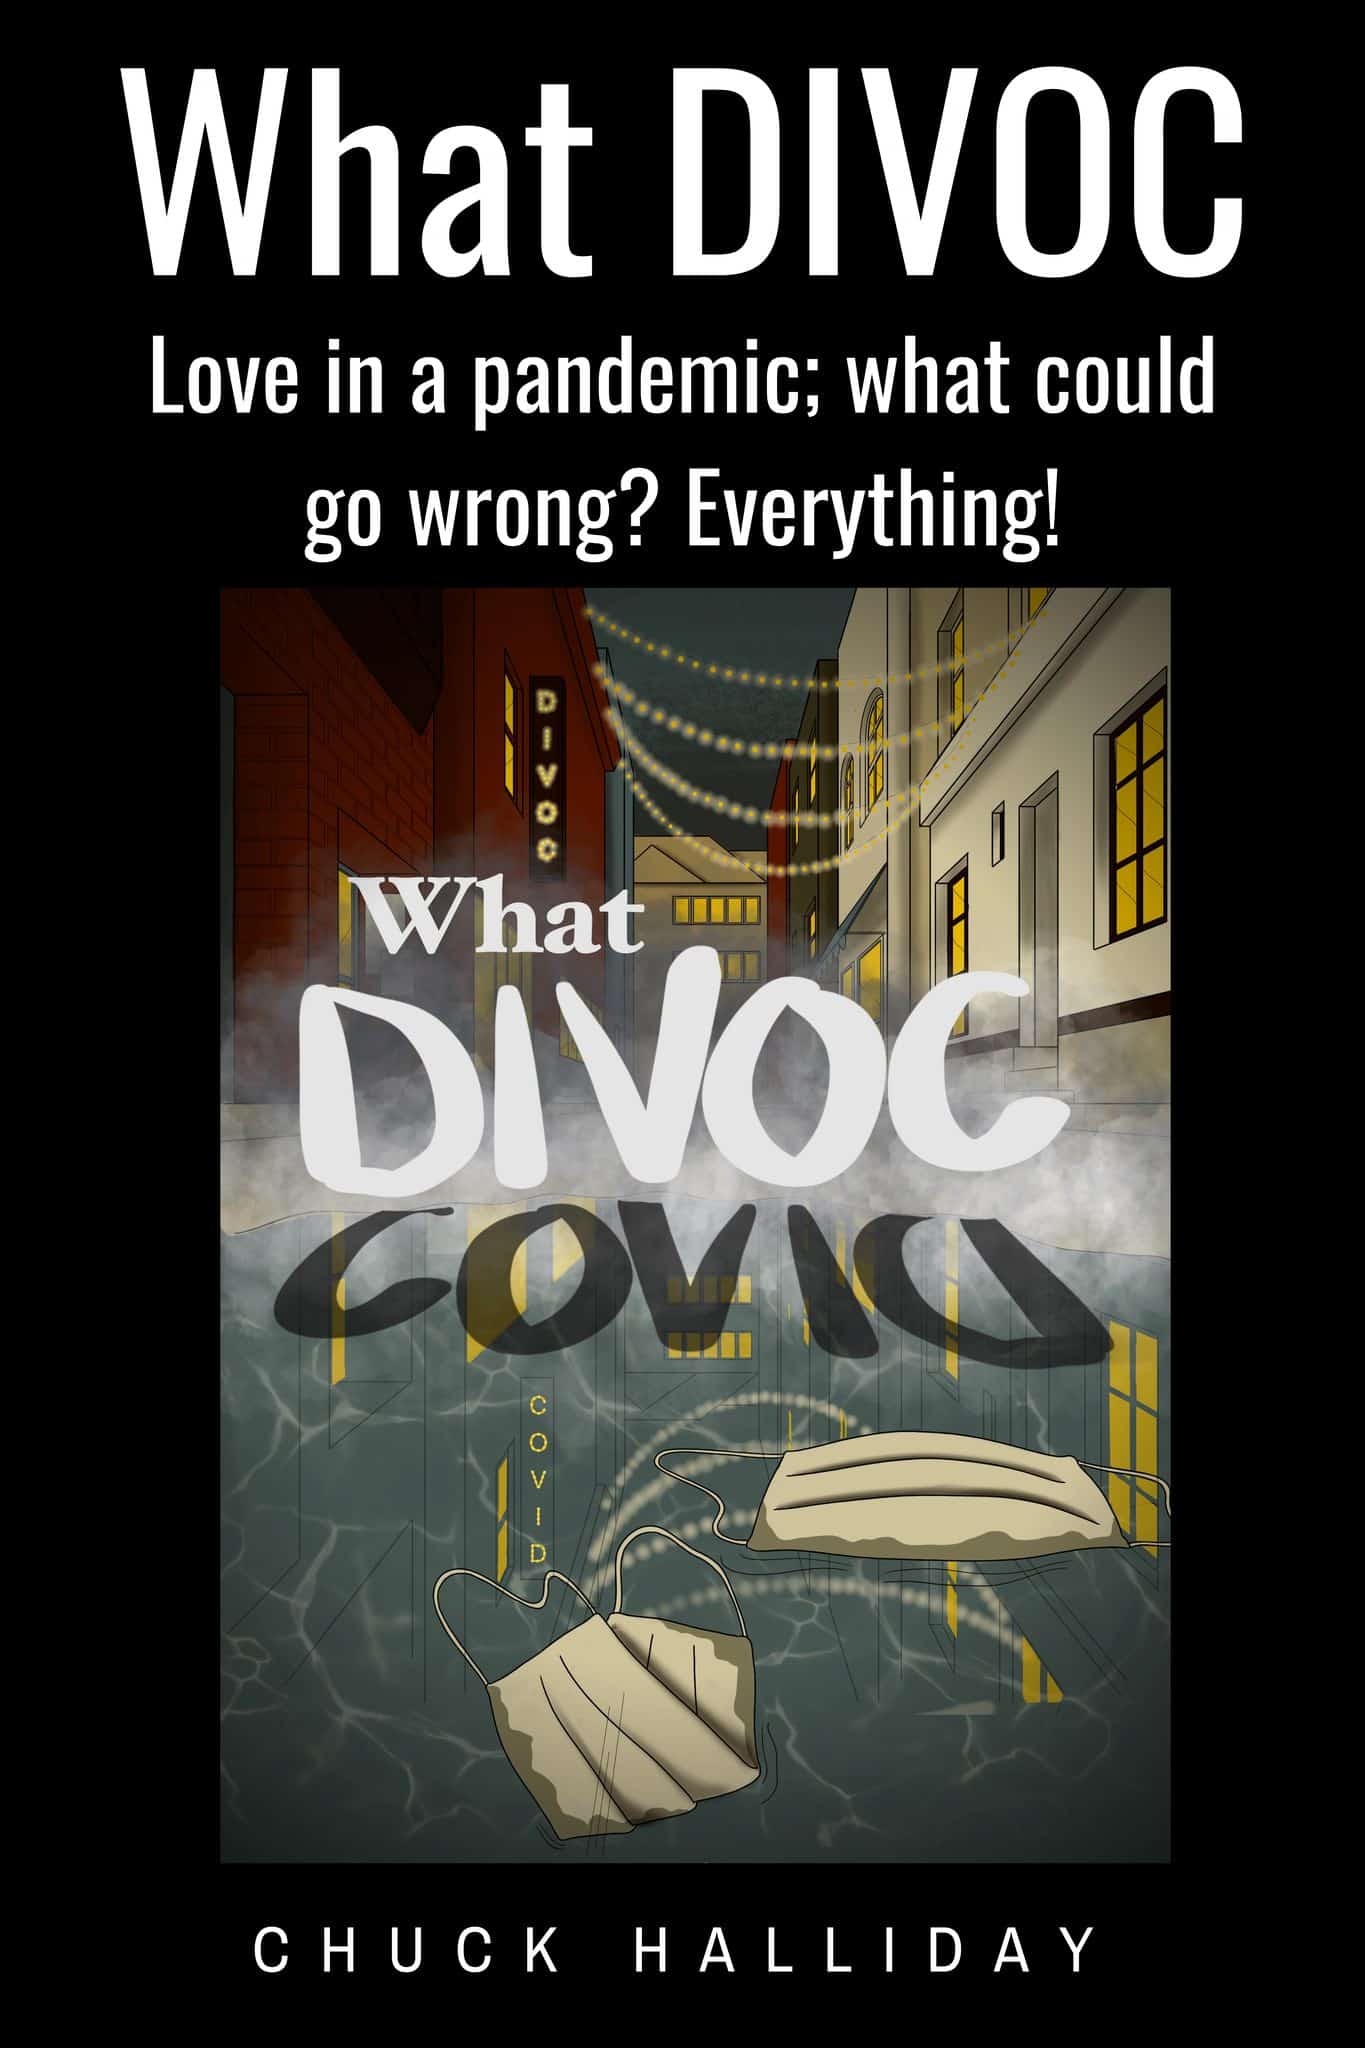 What DIVOC : Love in a pandemic, what could go wrong? Everything!